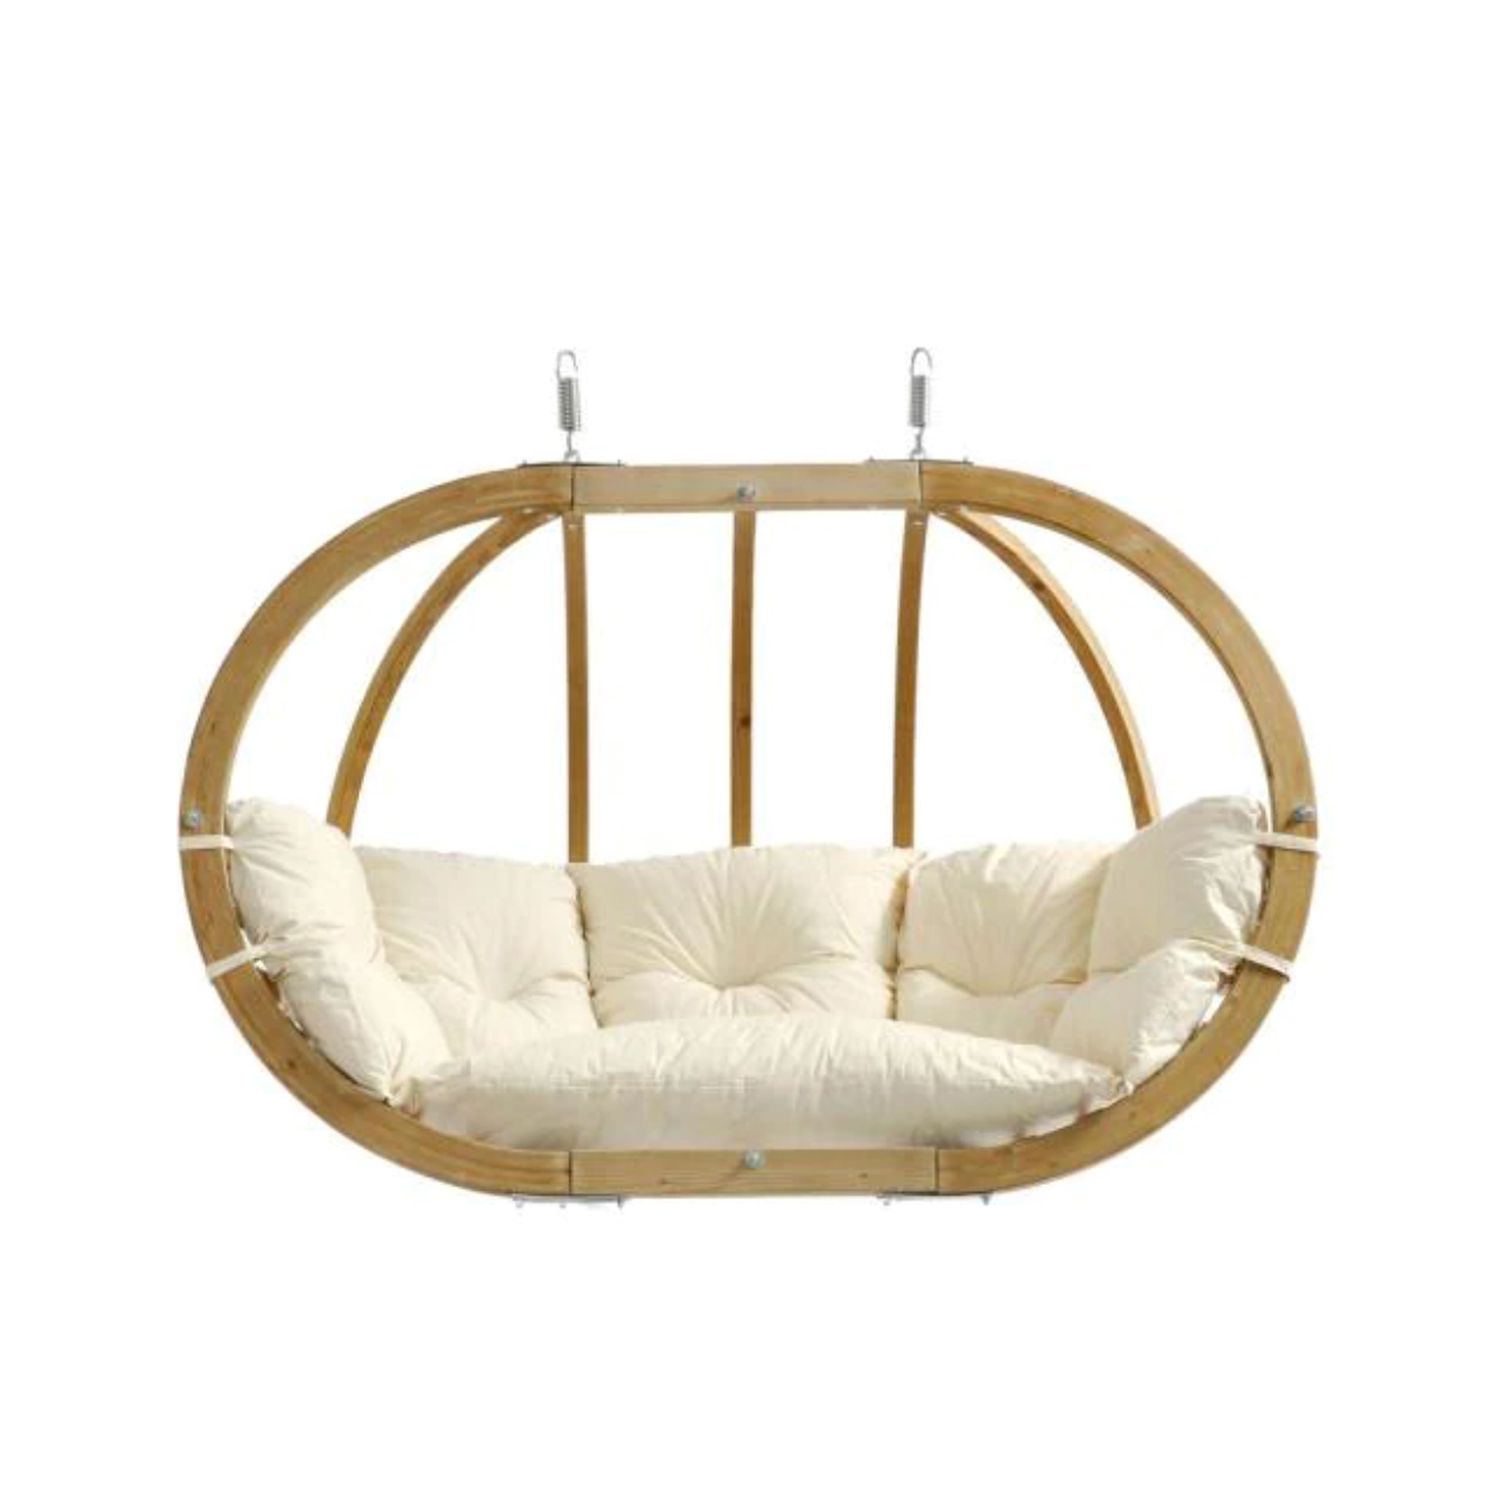 wooden two-person egg chair with white cushions